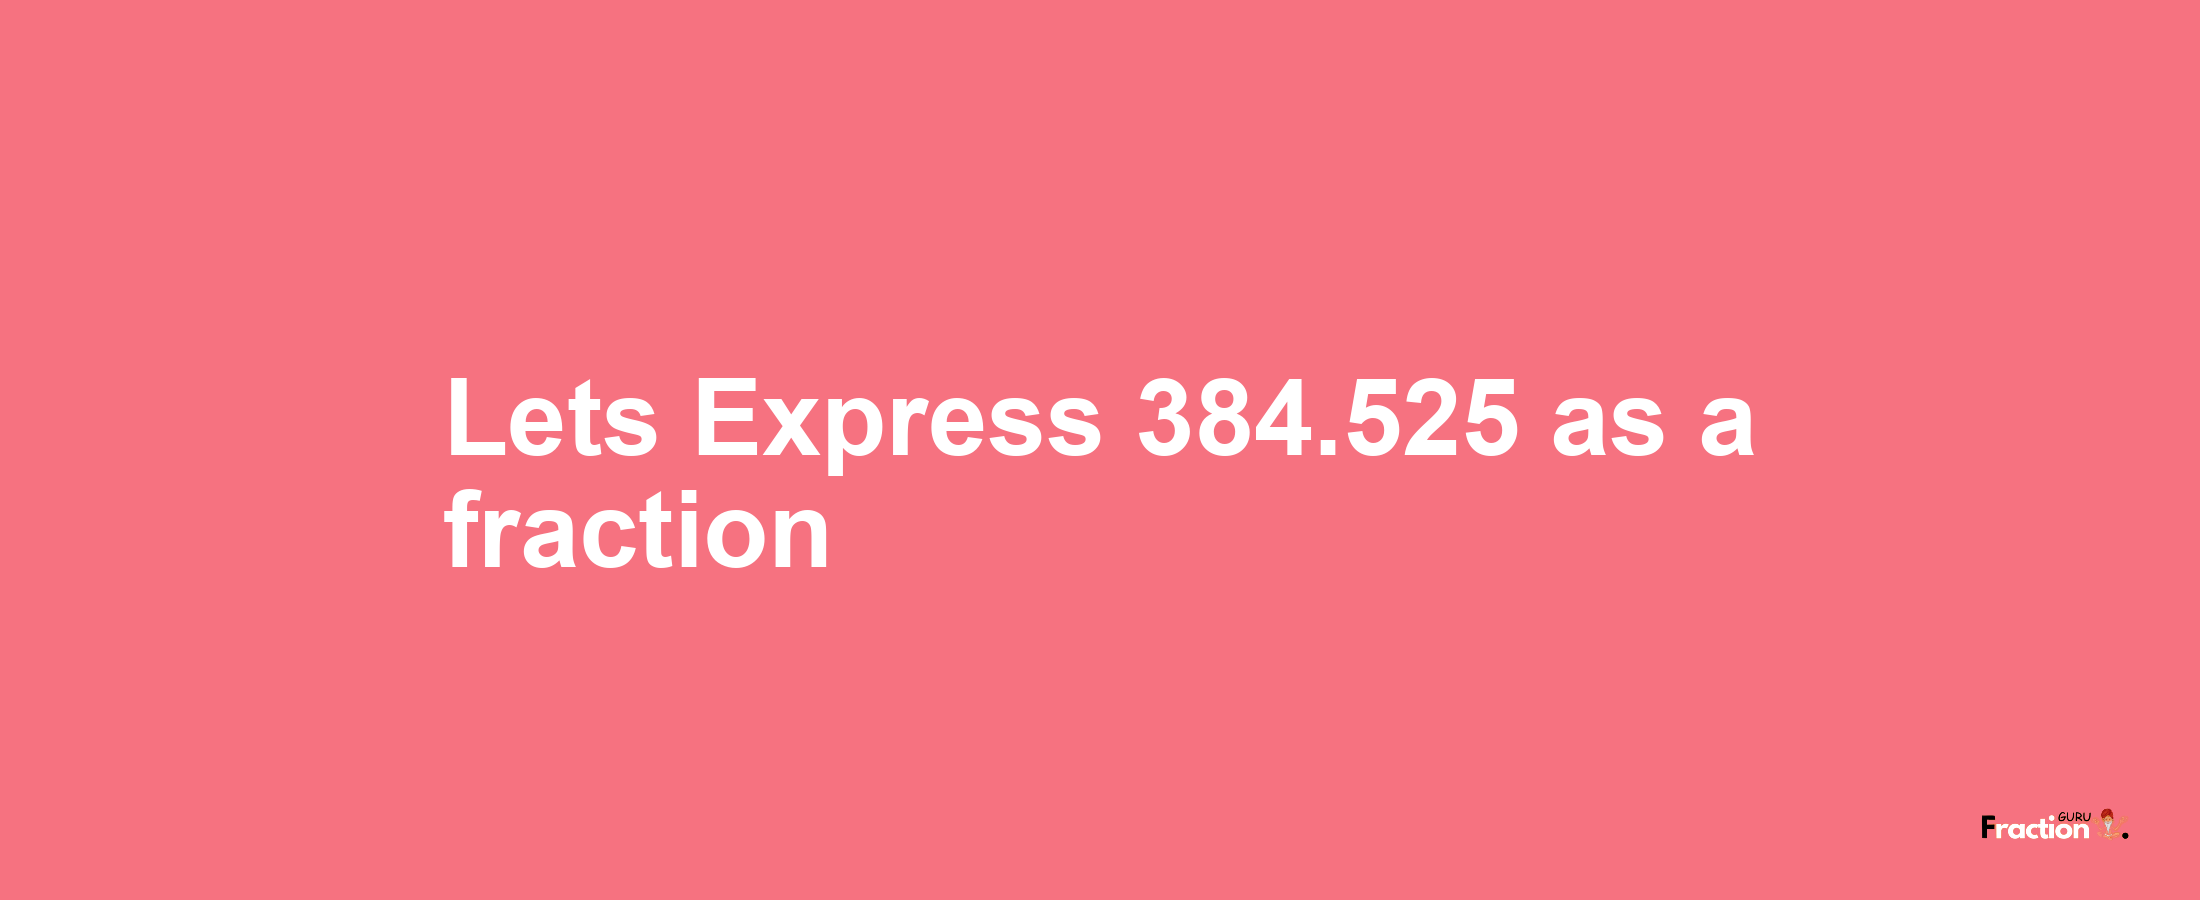 Lets Express 384.525 as afraction